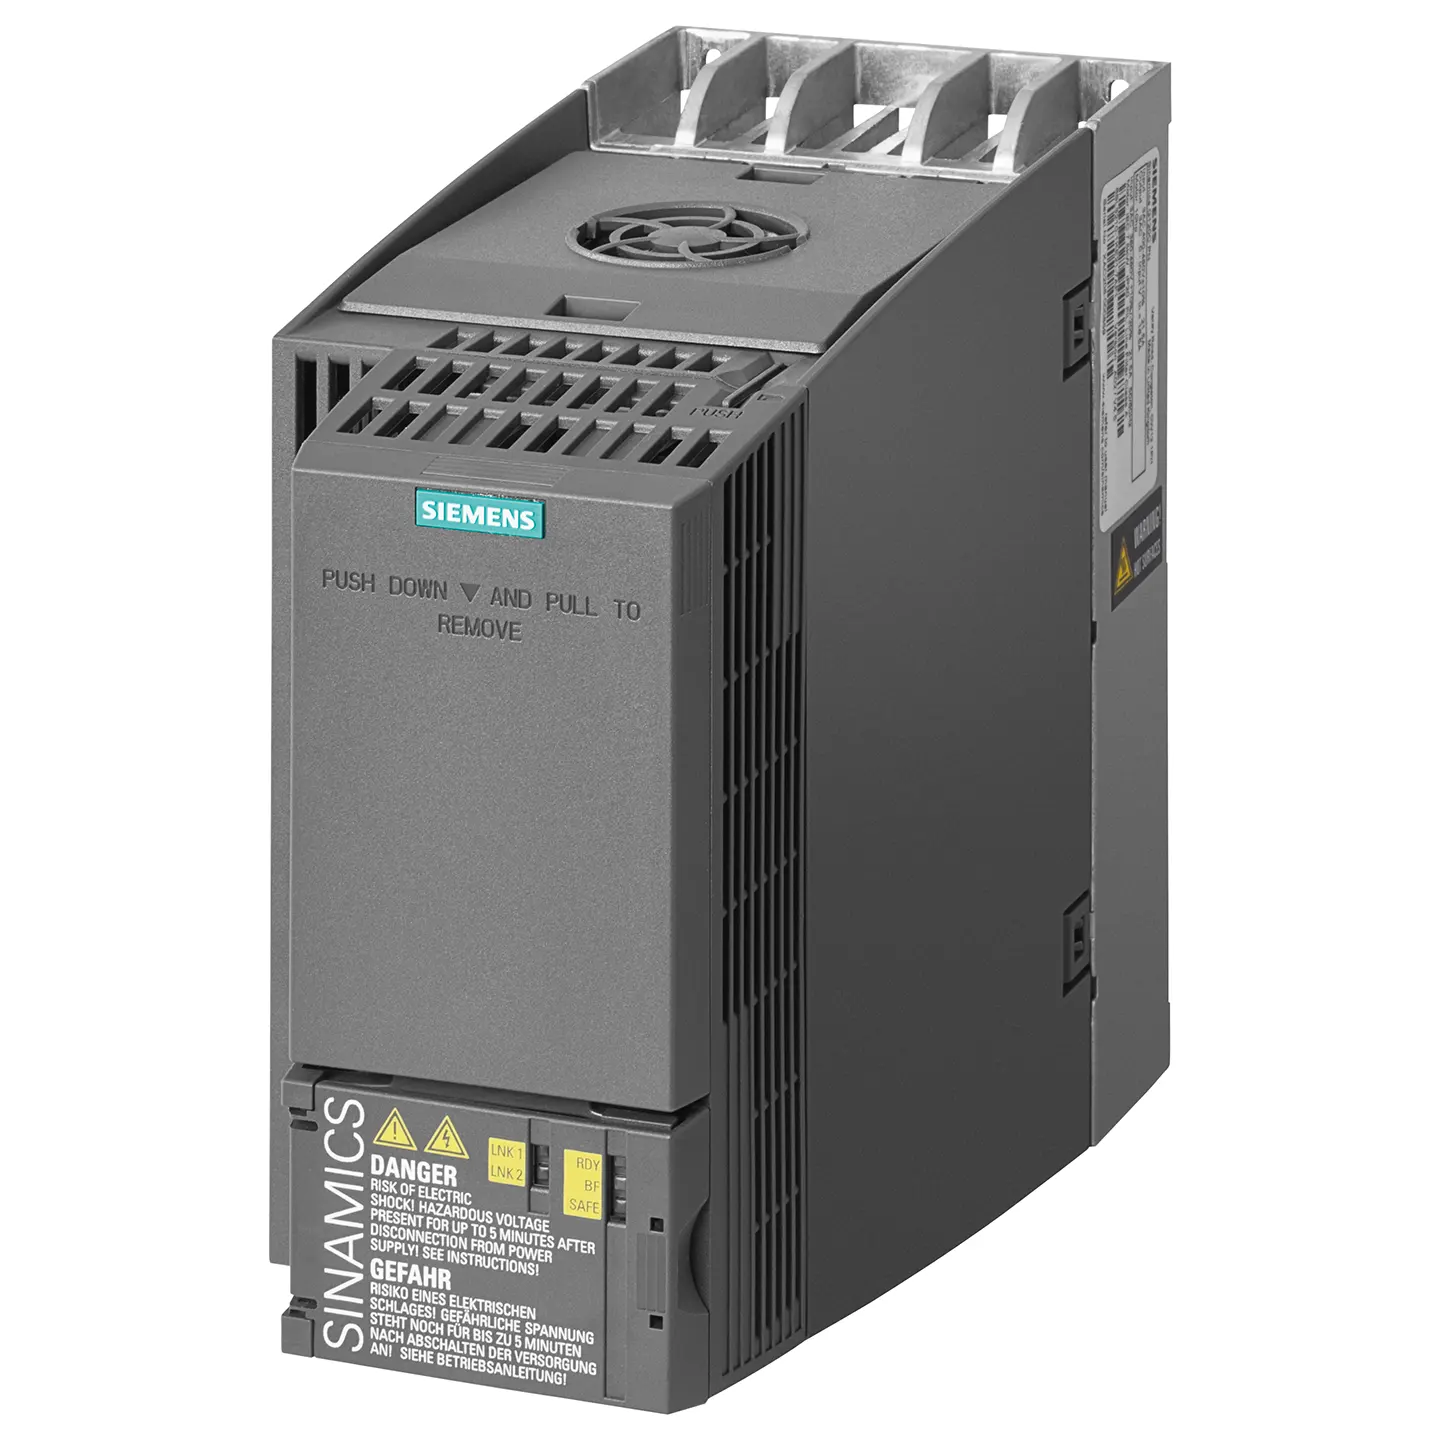 6SL3210-1KE21-3AF1 SINAMICS G120C RATED POWER 5,5KW WITH 150% OVERLOAD FOR 3 SEC New Original In Stock